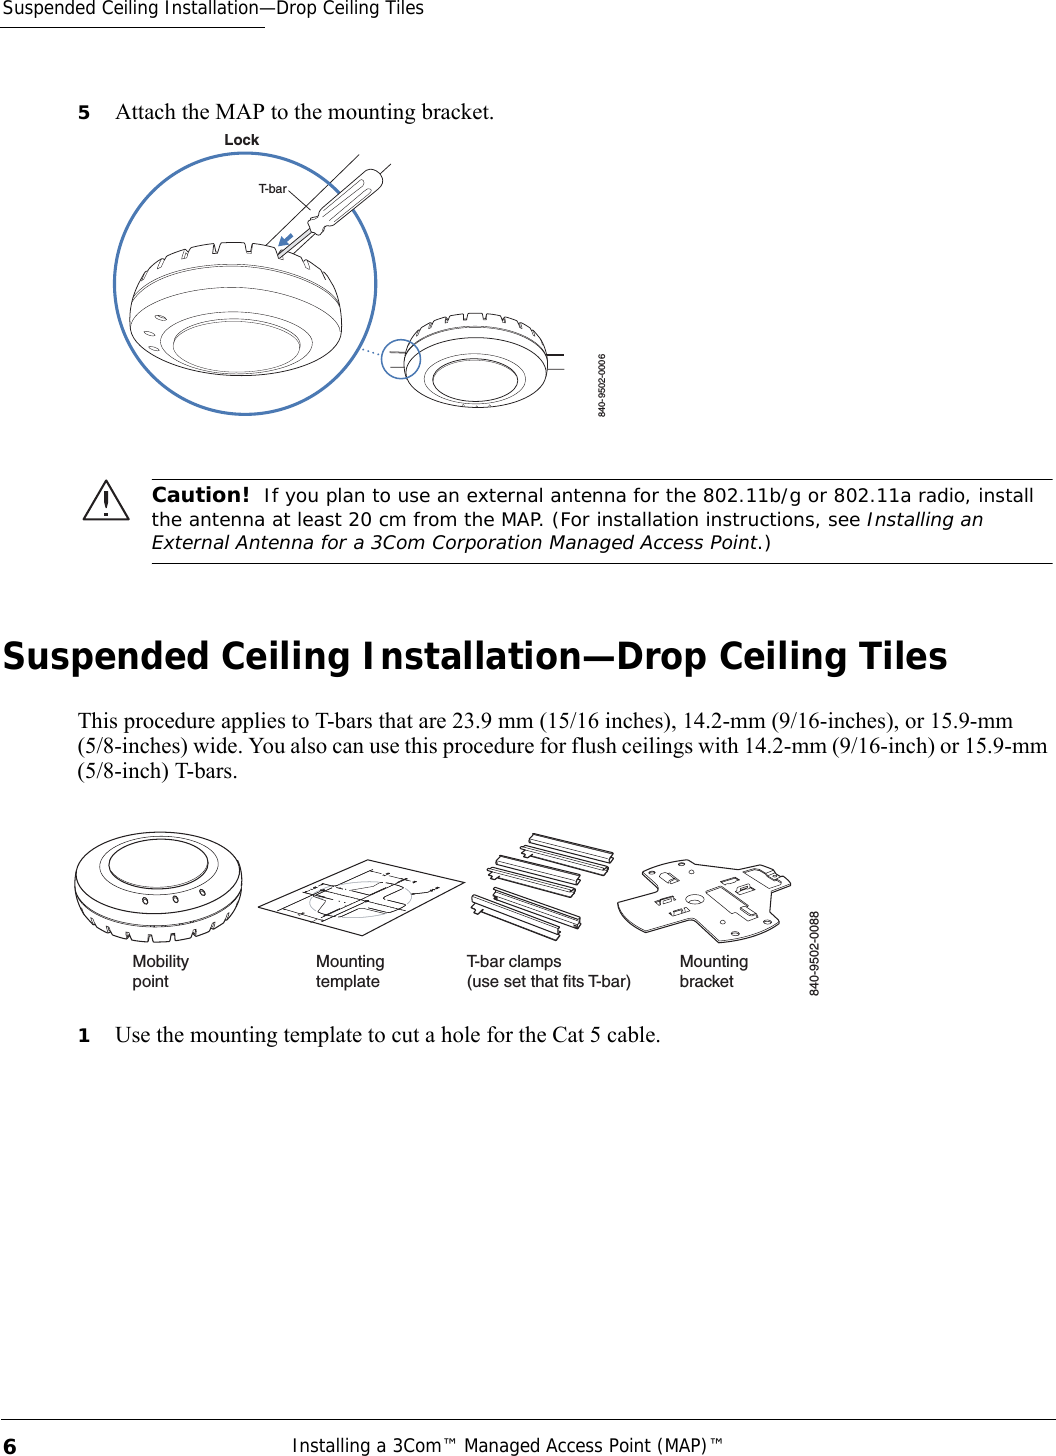 Suspended Ceiling Installation—Drop Ceiling TilesInstalling a 3Com™ Managed Access Point (MAP)™ 65Attach the MAP to the mounting bracket.Suspended Ceiling Installation—Drop Ceiling TilesThis procedure applies to T-bars that are 23.9 mm (15/16 inches), 14.2-mm (9/16-inches), or 15.9-mm (5/8-inches) wide. You also can use this procedure for flush ceilings with 14.2-mm (9/16-inch) or 15.9-mm (5/8-inch) T-bars.1Use the mounting template to cut a hole for the Cat 5 cable. Caution!  If you plan to use an external antenna for the 802.11b/g or 802.11a radio, install the antenna at least 20 cm from the MAP. (For installation instructions, see Installing an External Antenna for a 3Com Corporation Managed Access Point.)840-9502-0006LockT-barT-bar clamps(use set that fits T-bar) MountingtemplateMountingbracketMobilitypoint840-9502-0088